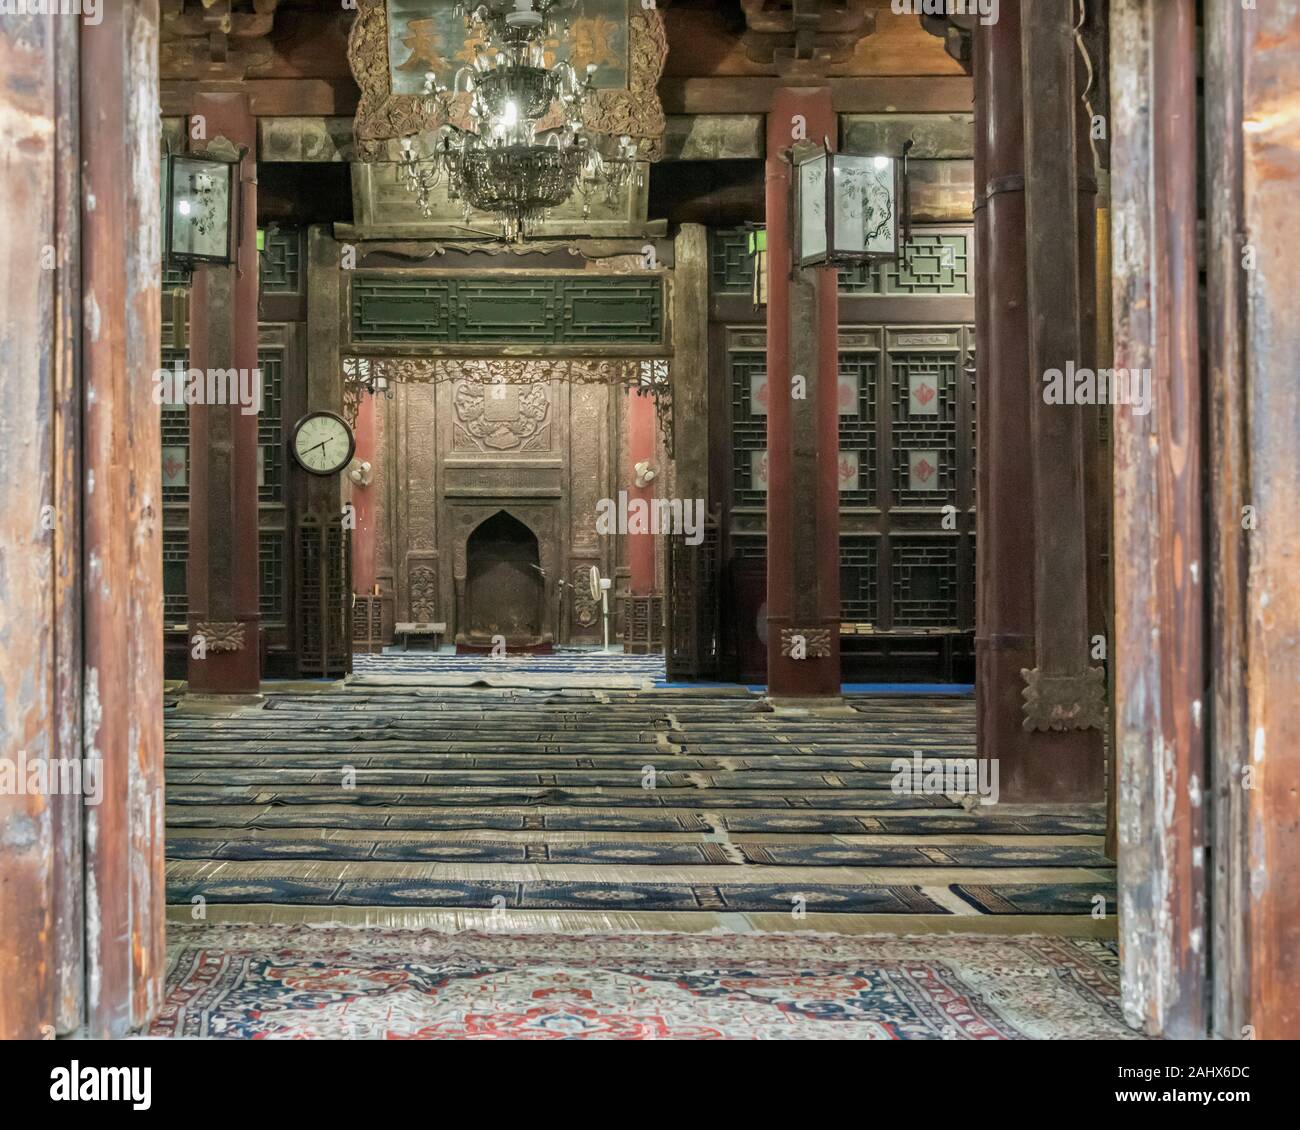 Looking through to the Mihrab, 1392 AD, Great Mosque of Xian, Shaanxi, China Stock Photo